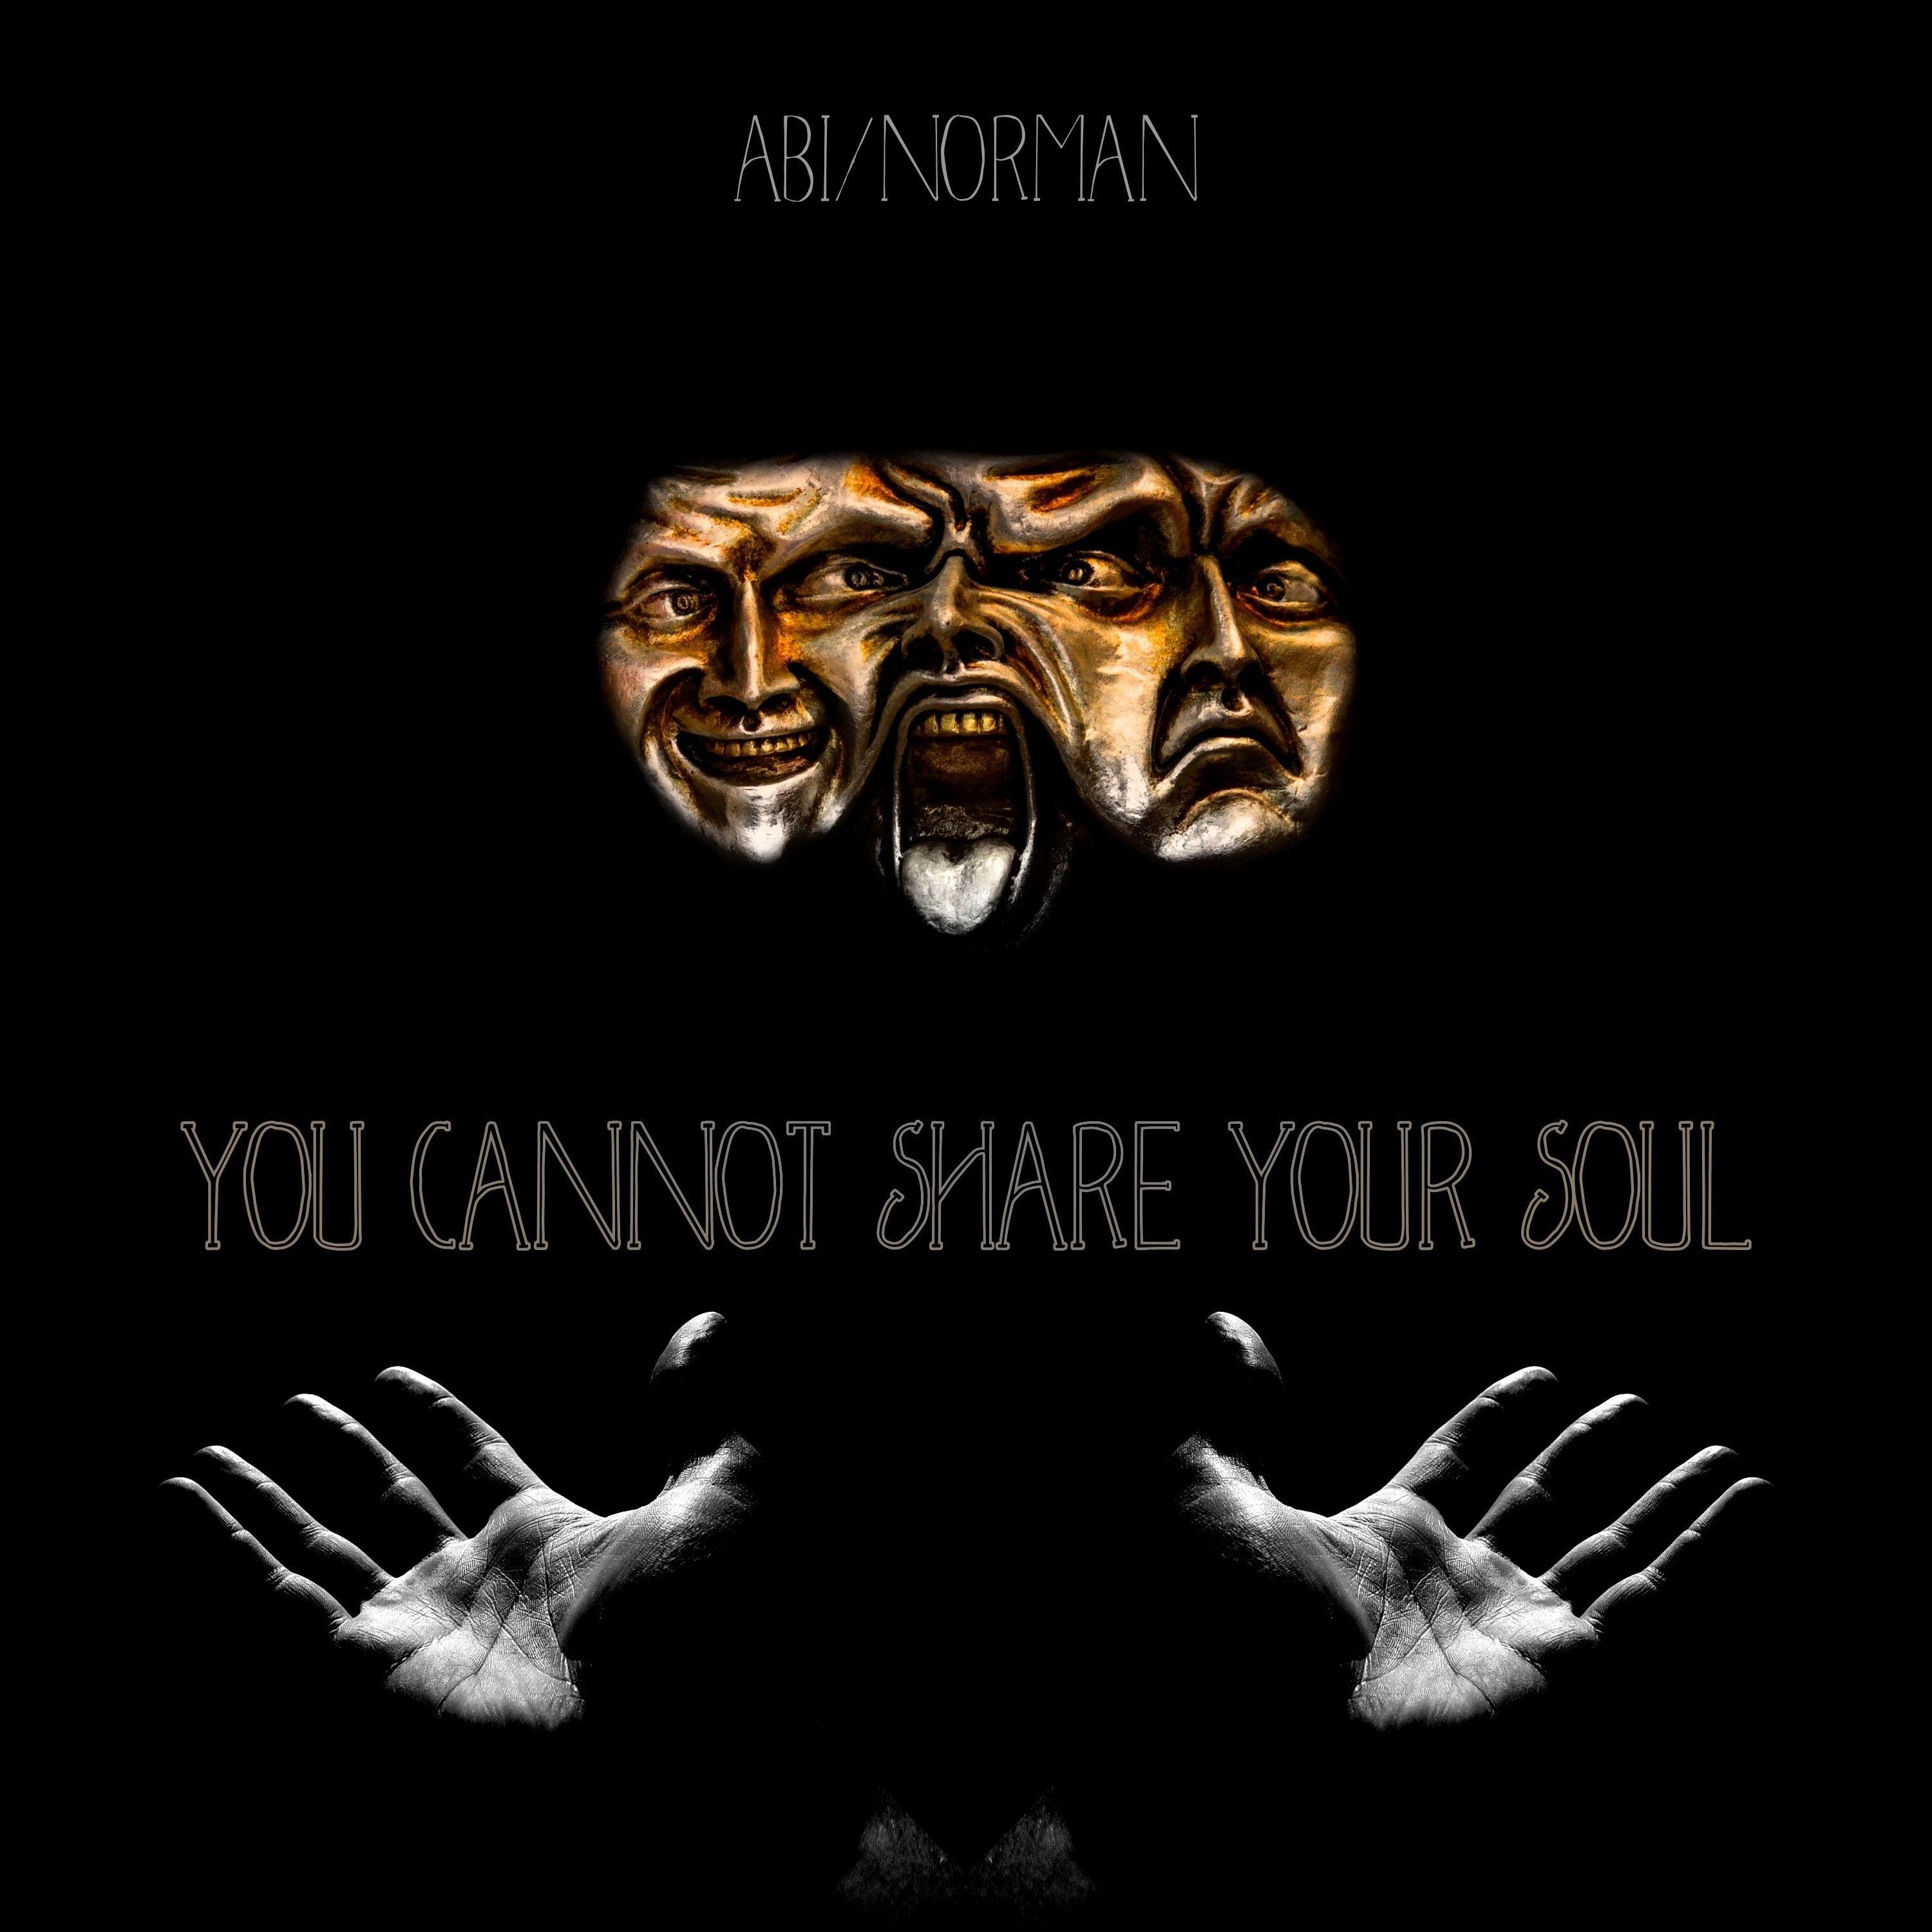 You Cannot Share Your Soul